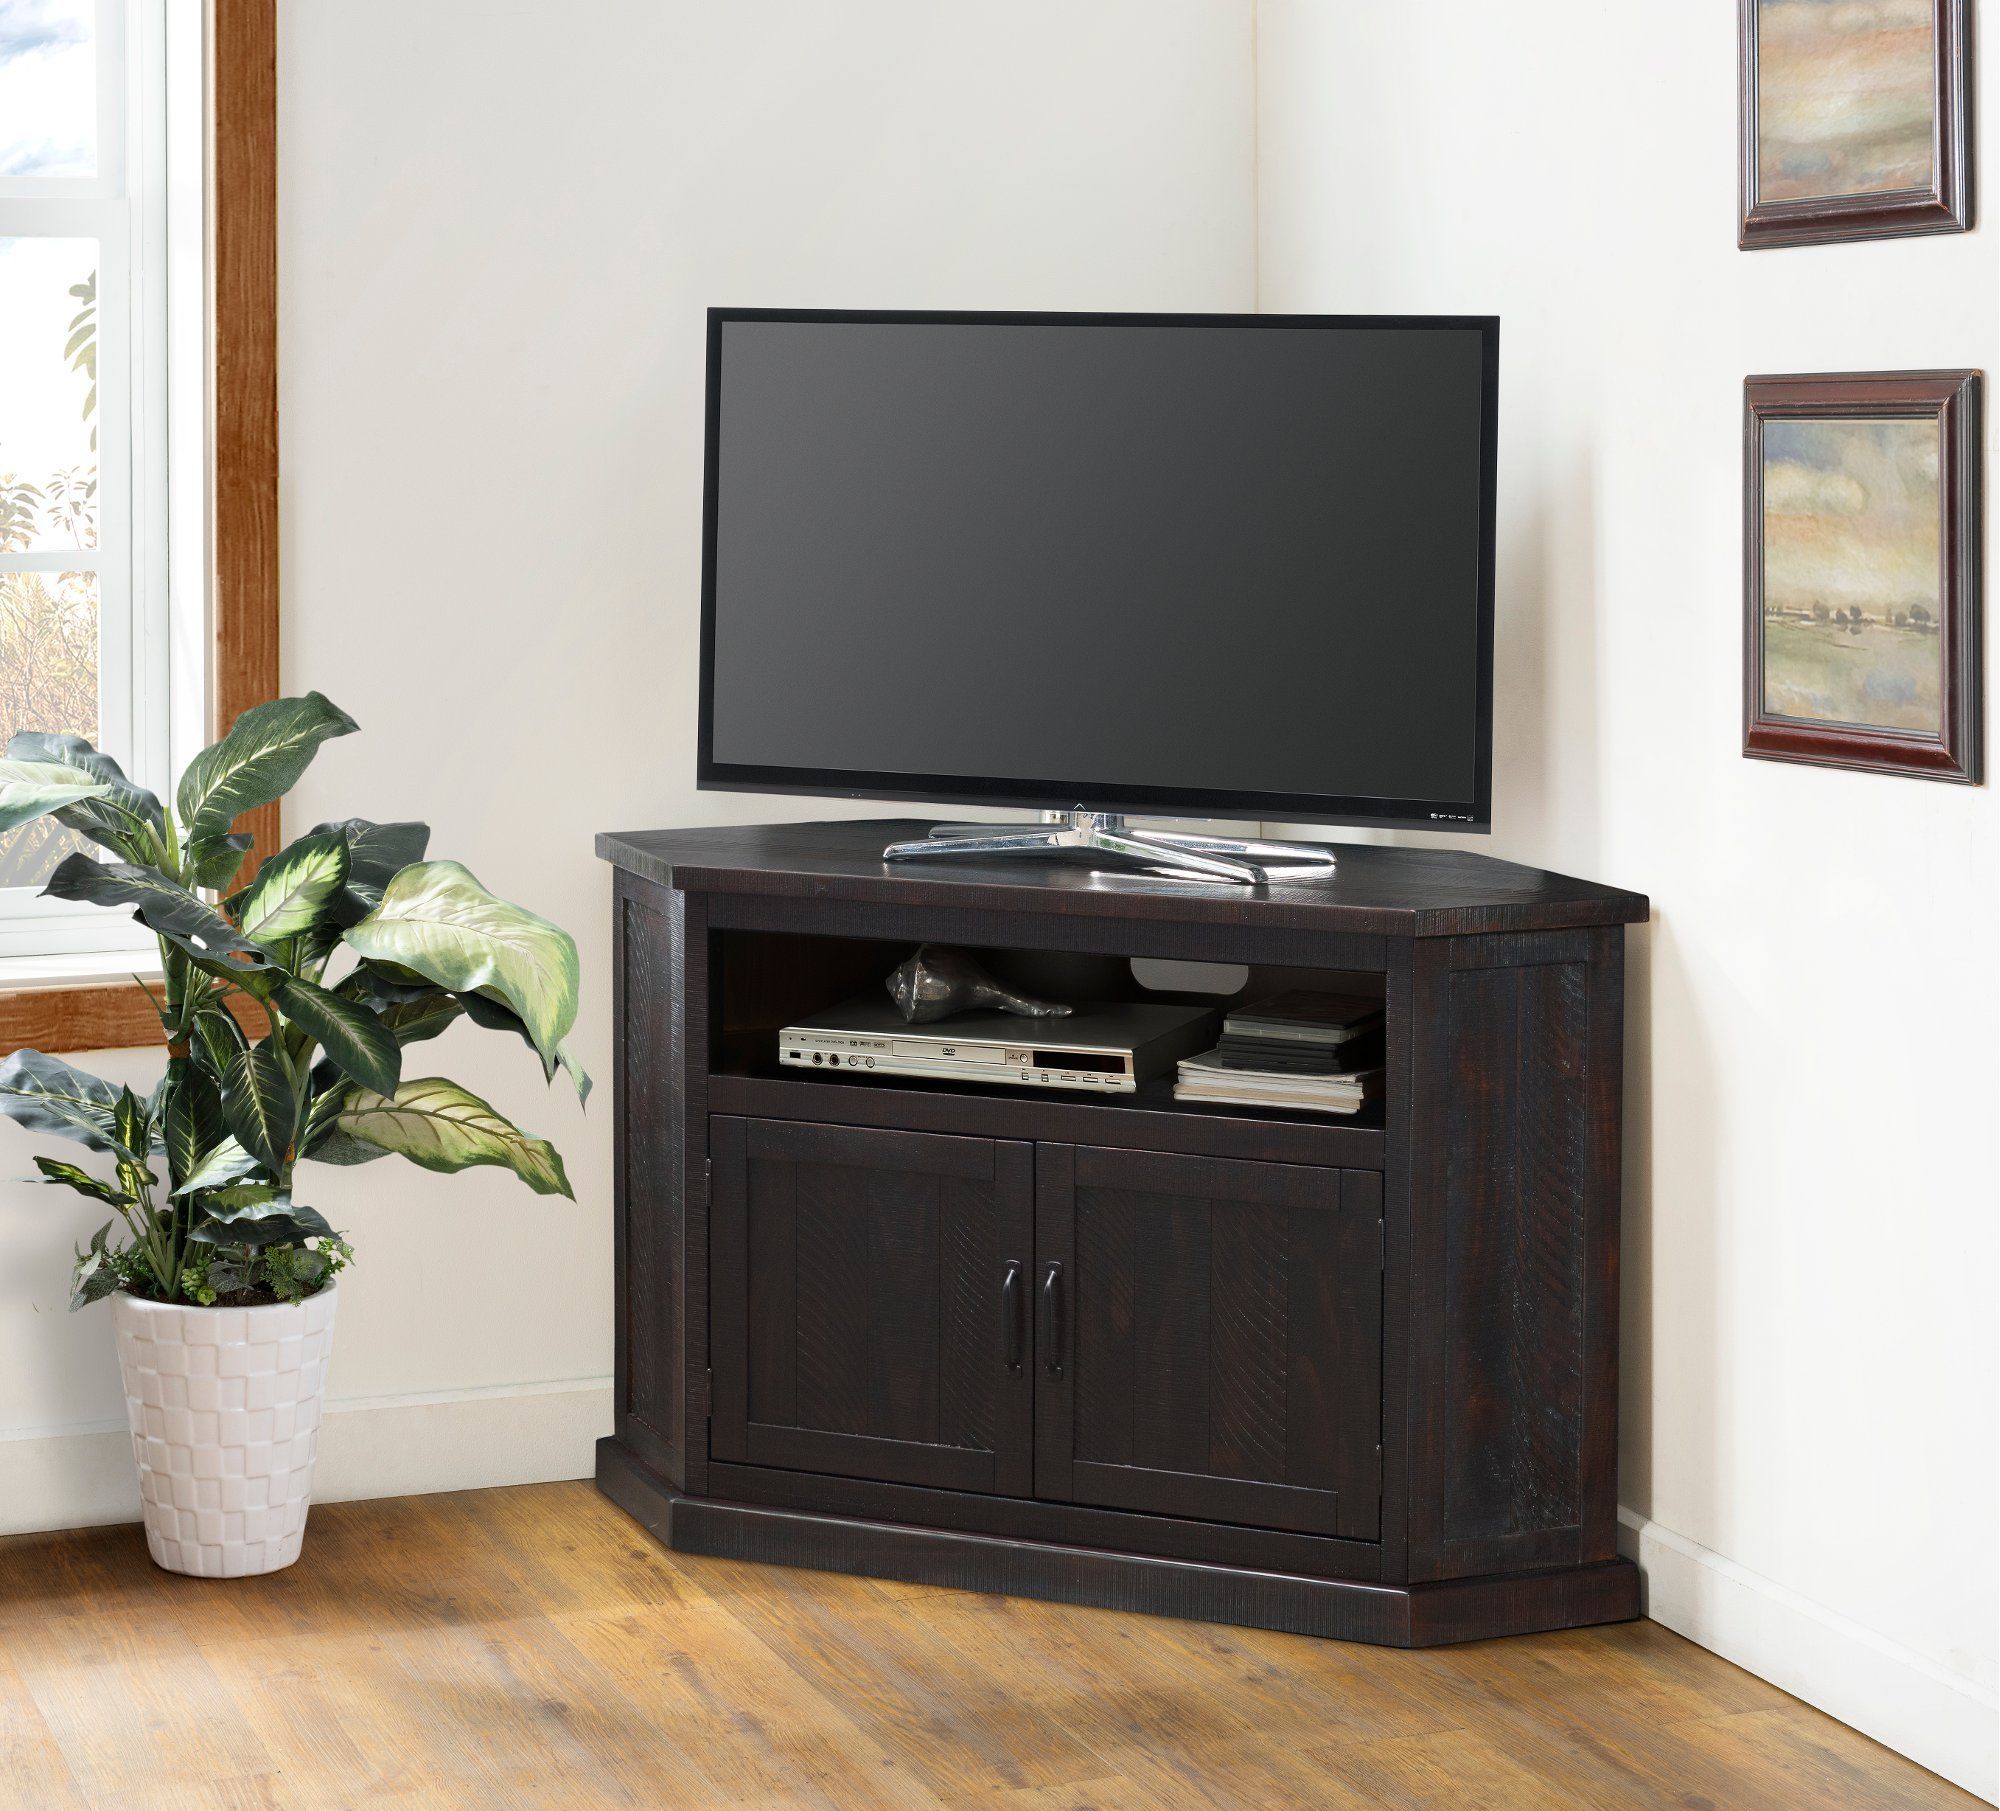 Espresso Contemporary 55 Inch Corner Tv Stand – Rustic With Modern Corner Tv Stands (View 1 of 15)